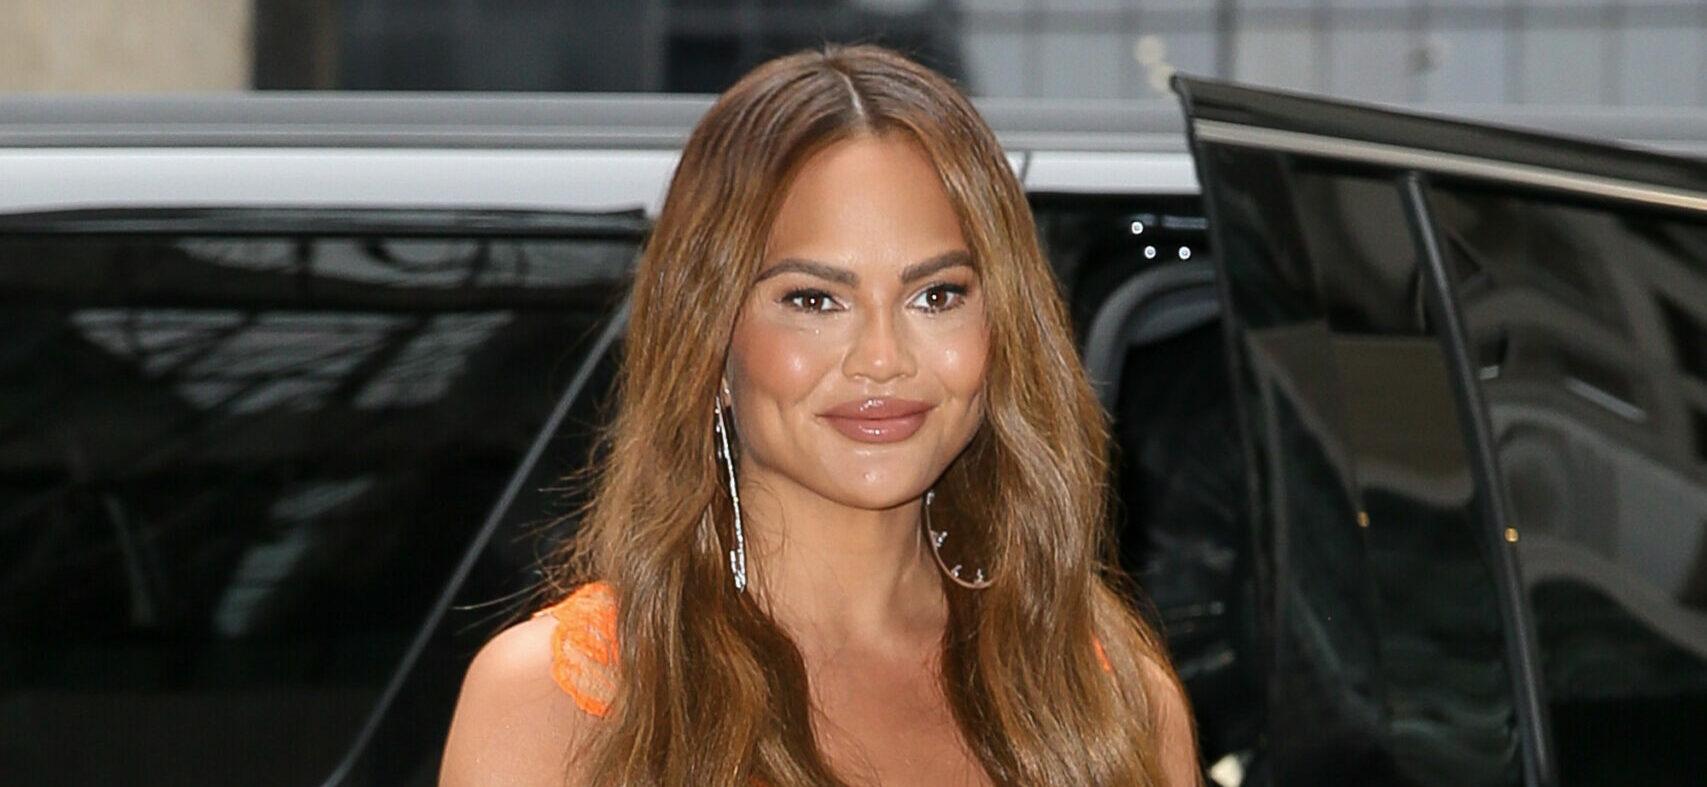 Chrissy Teigen Asks Whitney Cummings To Be Her Baby’s Godmother During Podcast